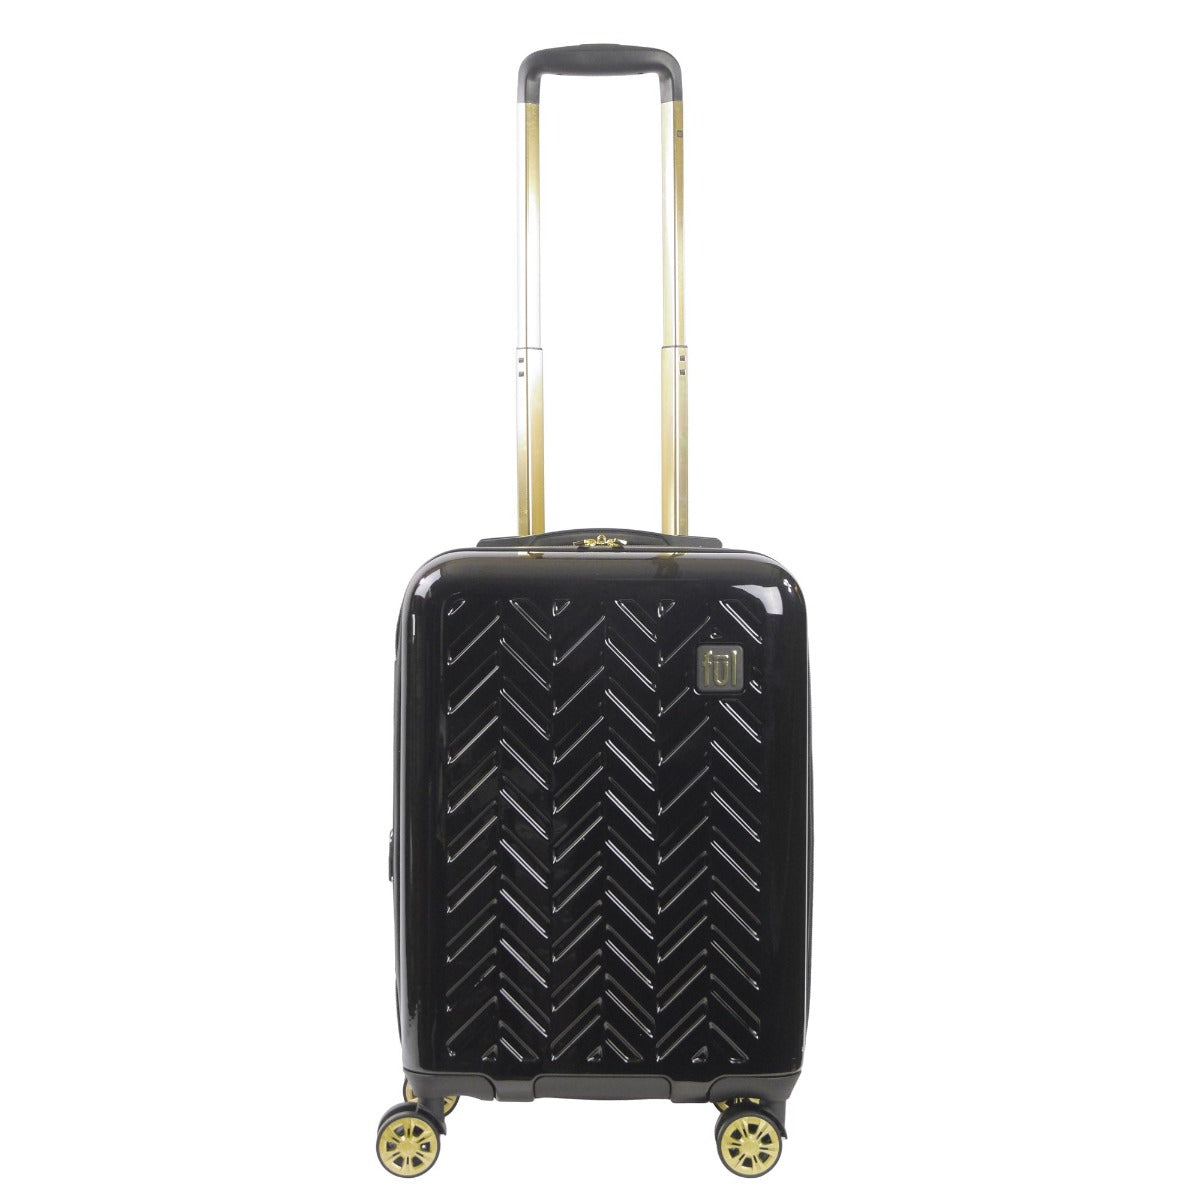 Ful Groove 22" carry-on hardside degree spinner suitcase Black luggage gold details